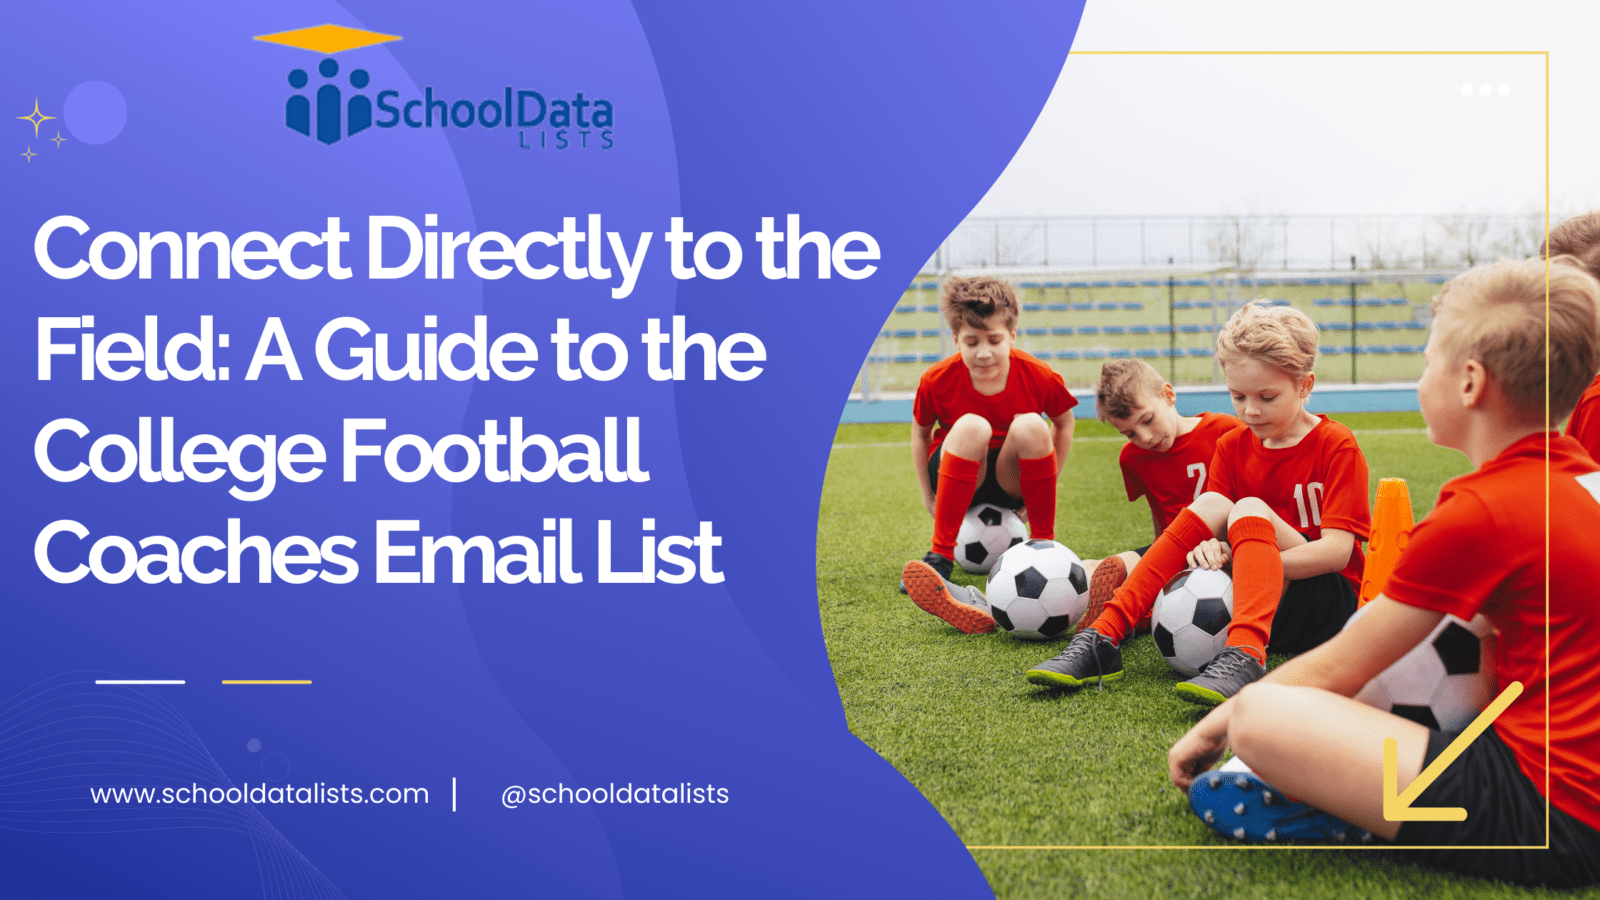 Connect Directly to the Field: A Guide to the College Football Coaches Email List